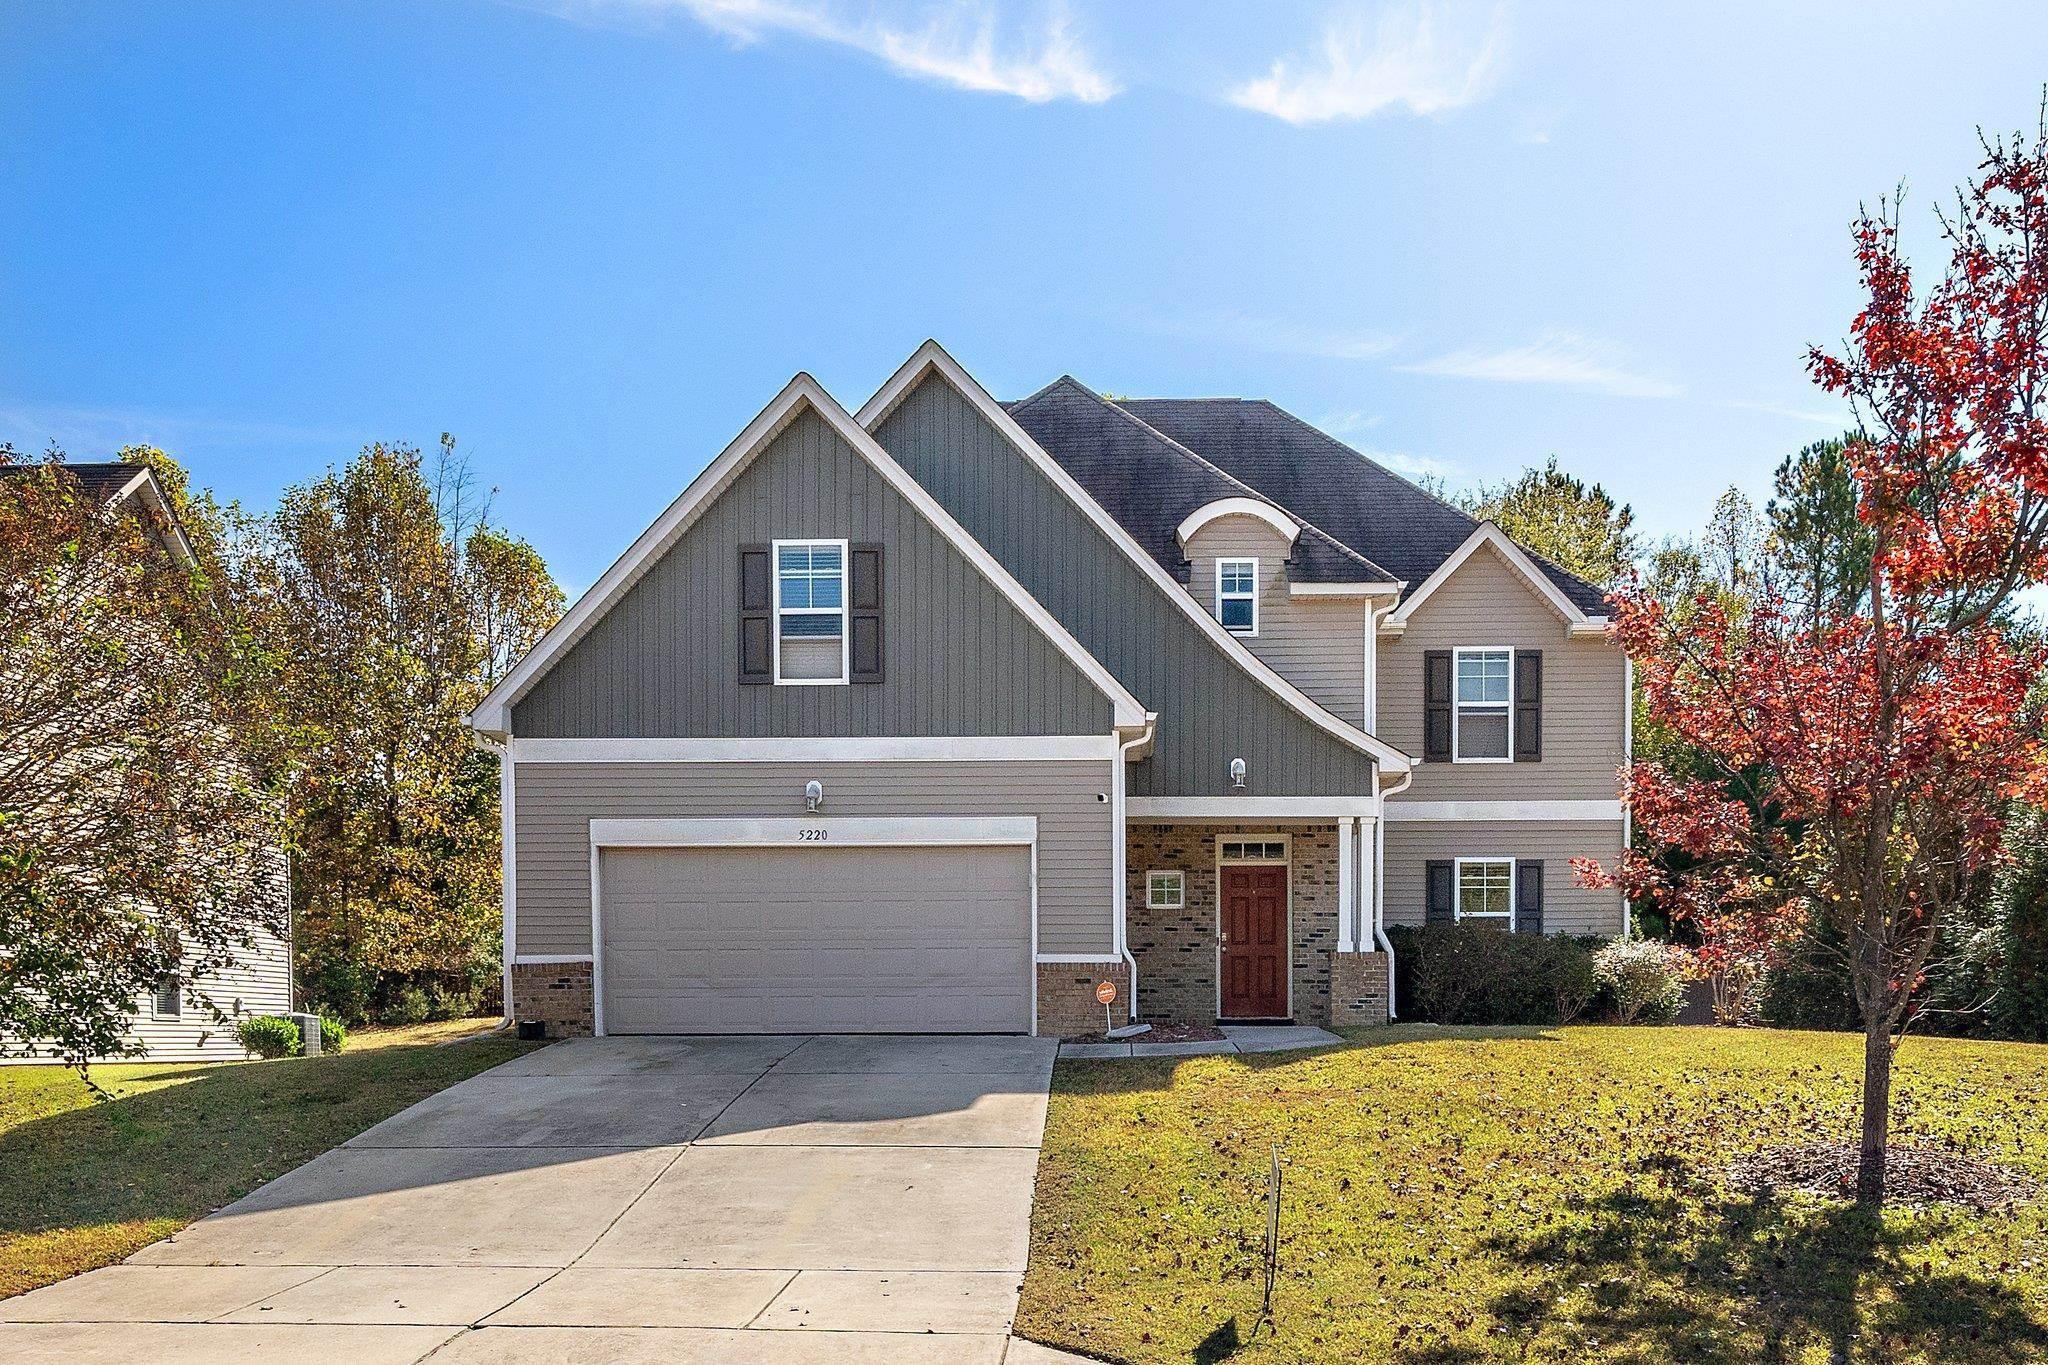 Photo one of 5220 Sapphire Springs Dr Knightdale NC 27545 | MLS 2538167